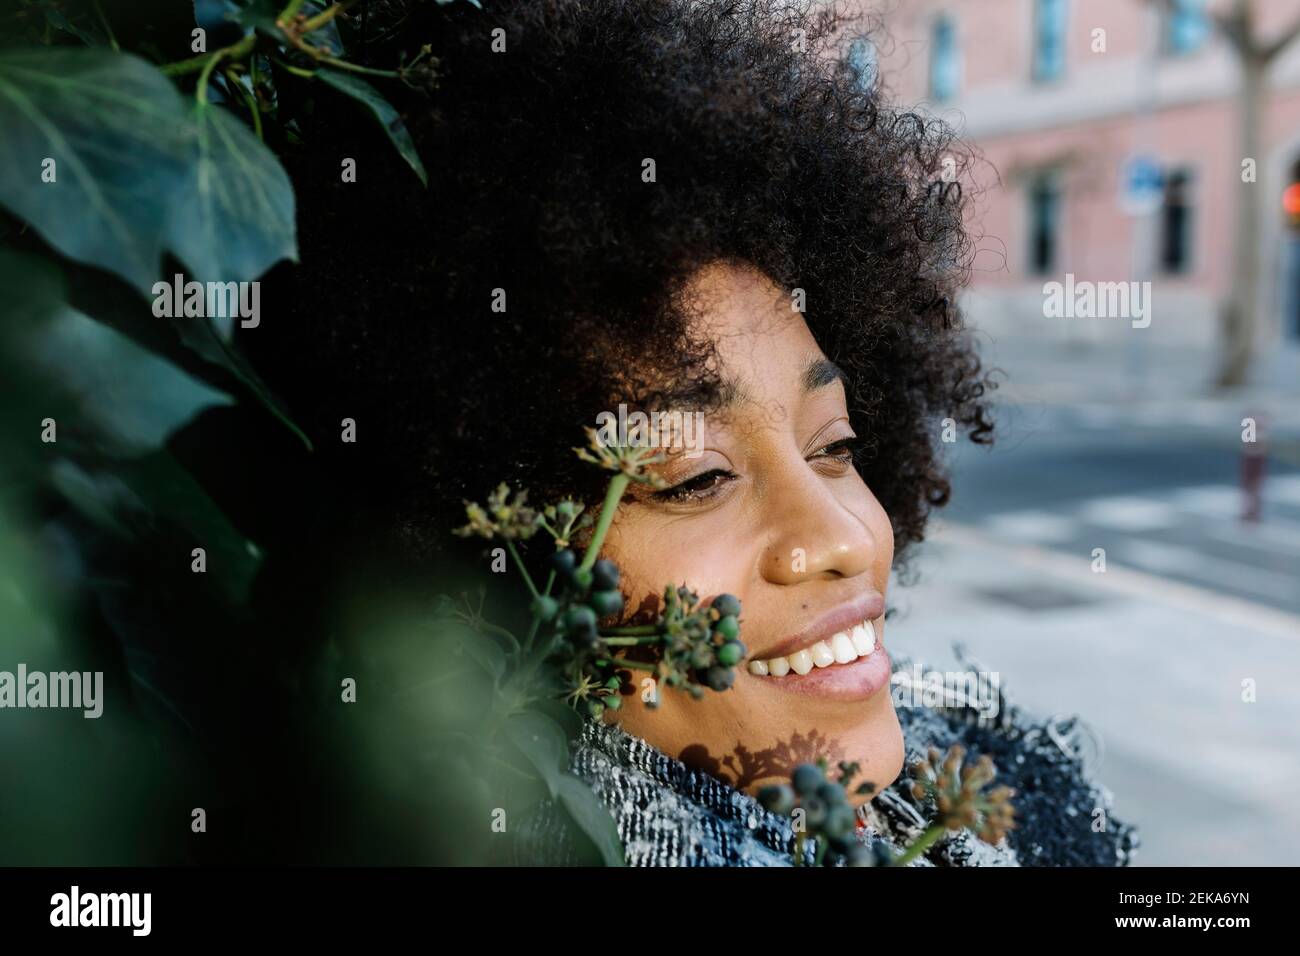 Smiling woman contemplating while leaning on green leaf Stock Photo